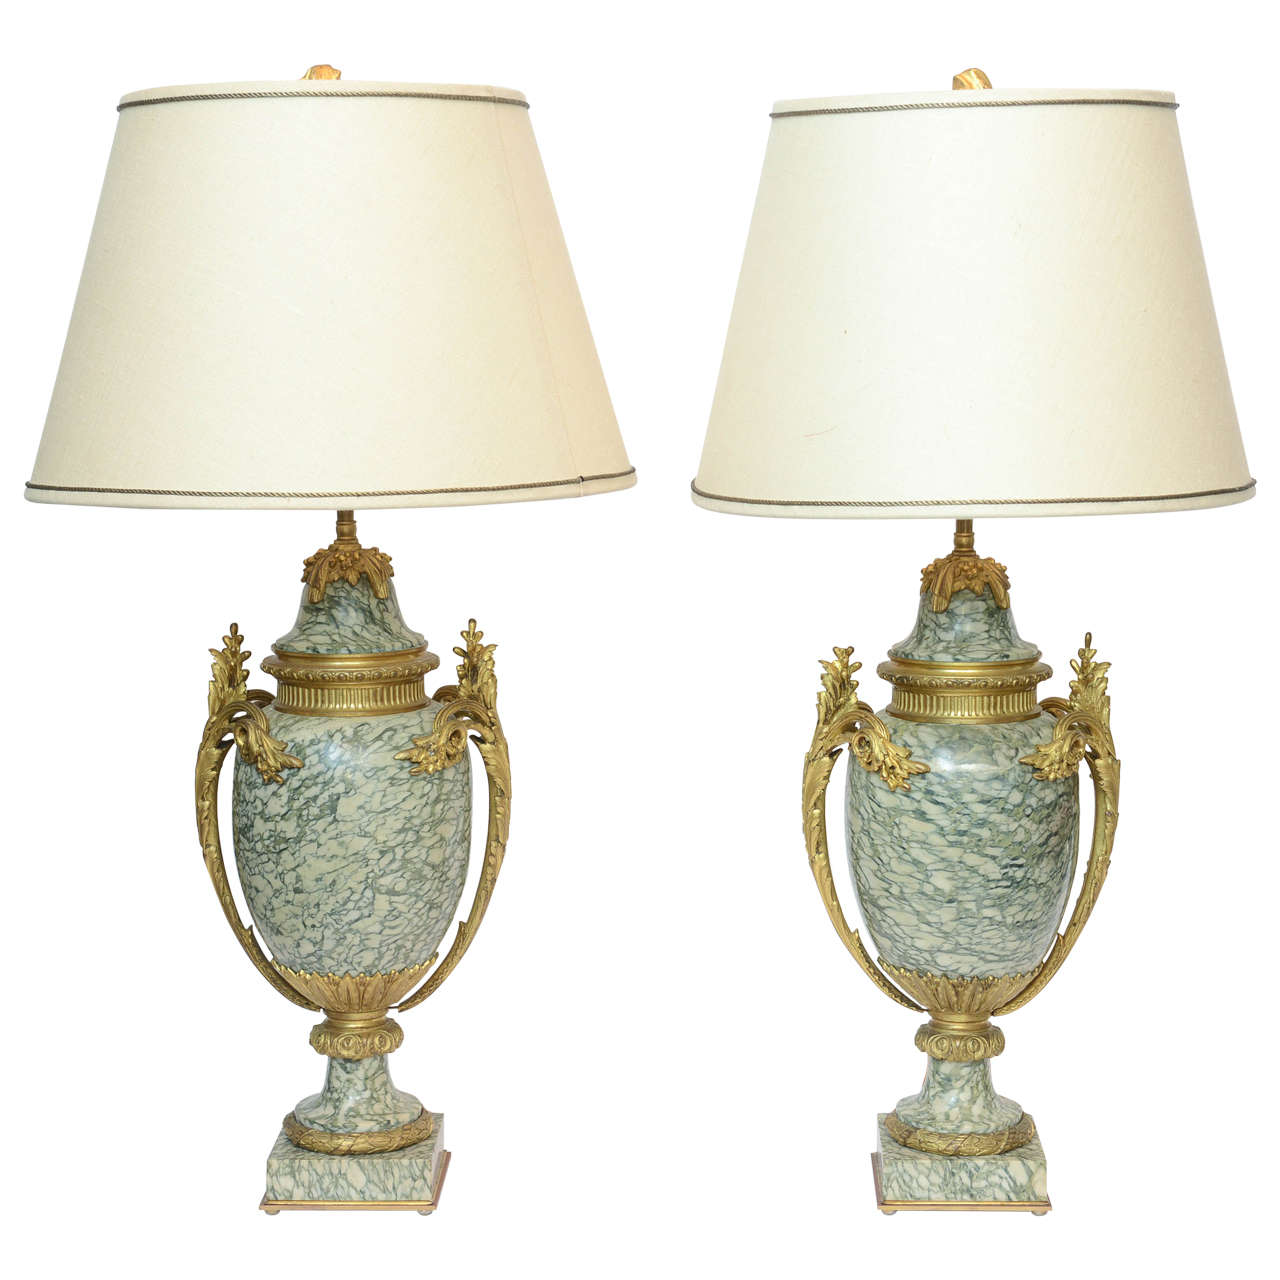 Pair of Green and Beige Gilt Bronze French Marble Urns, circa 1850 For Sale